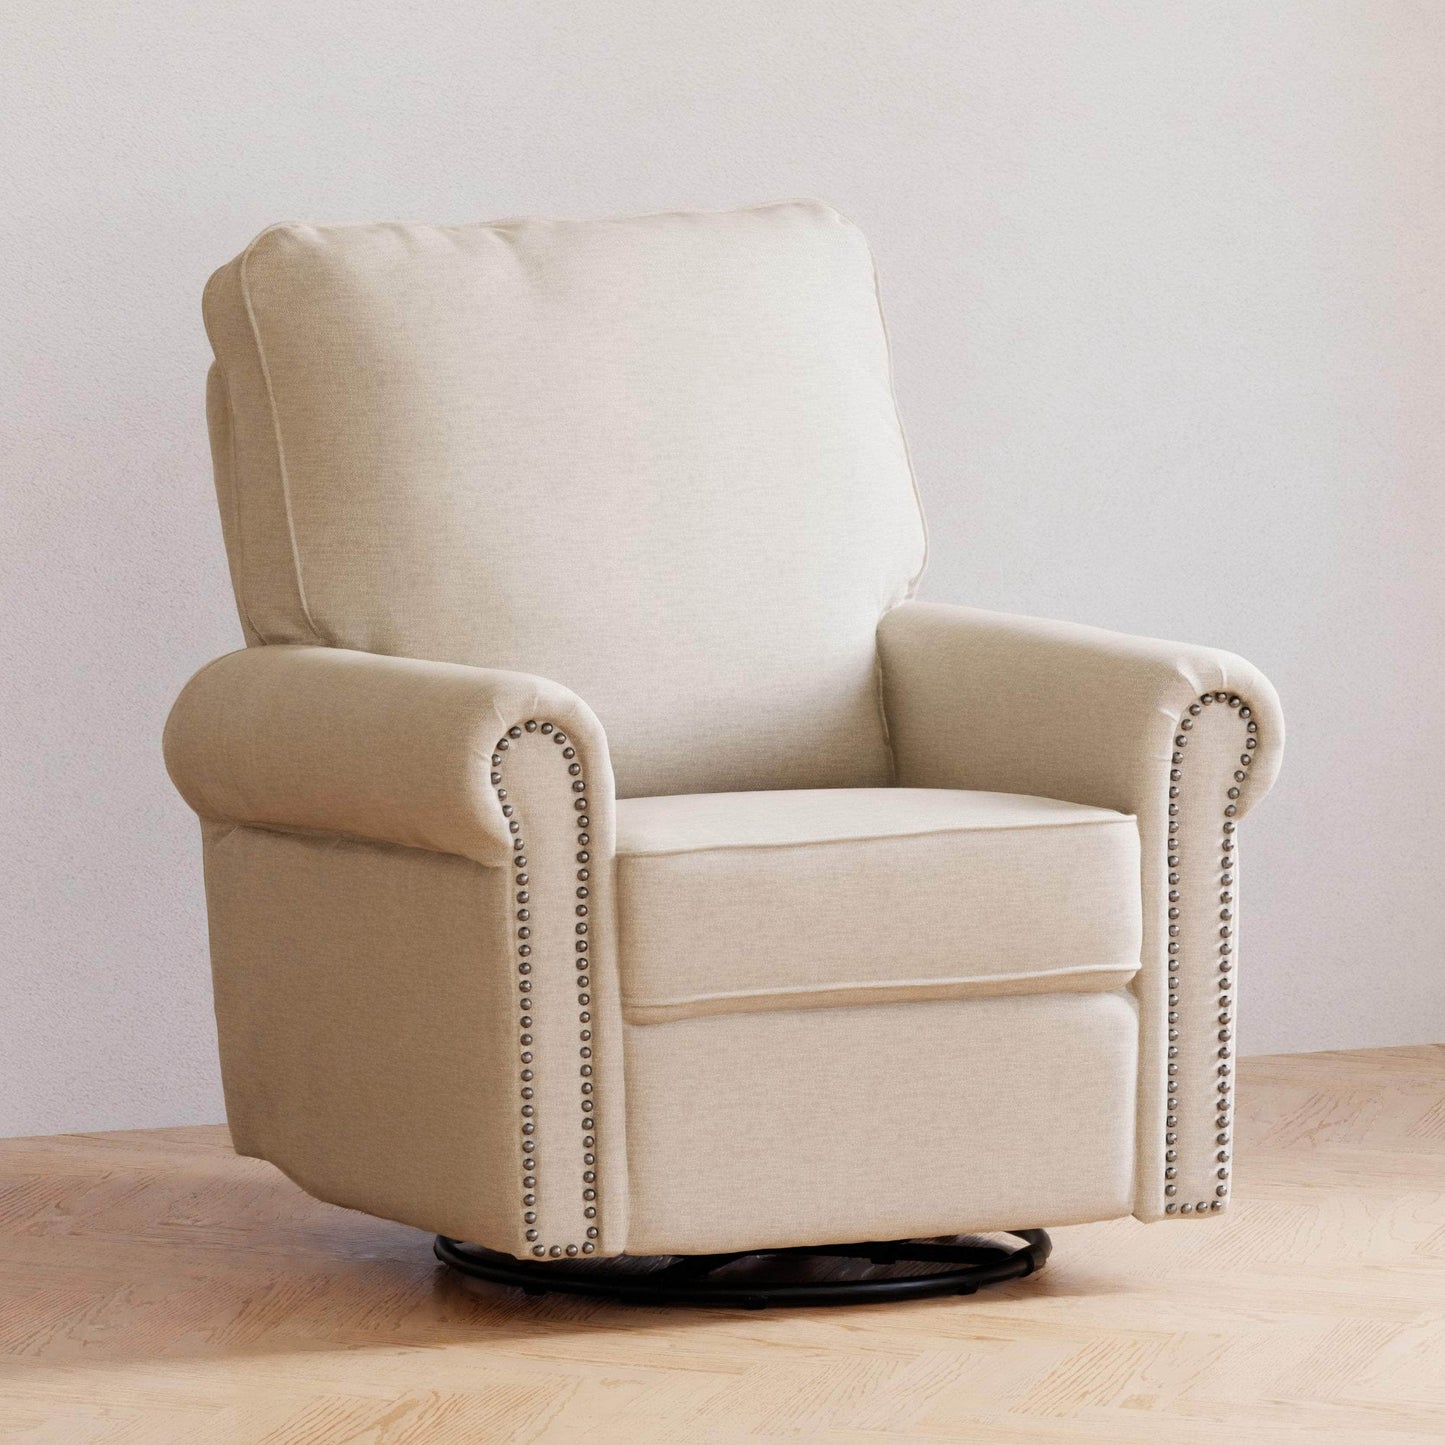 Linden Electronic Recliner and Swivel Glider in Eco-Performance Fabric with USB port | Water Repellent & Stain Resistant